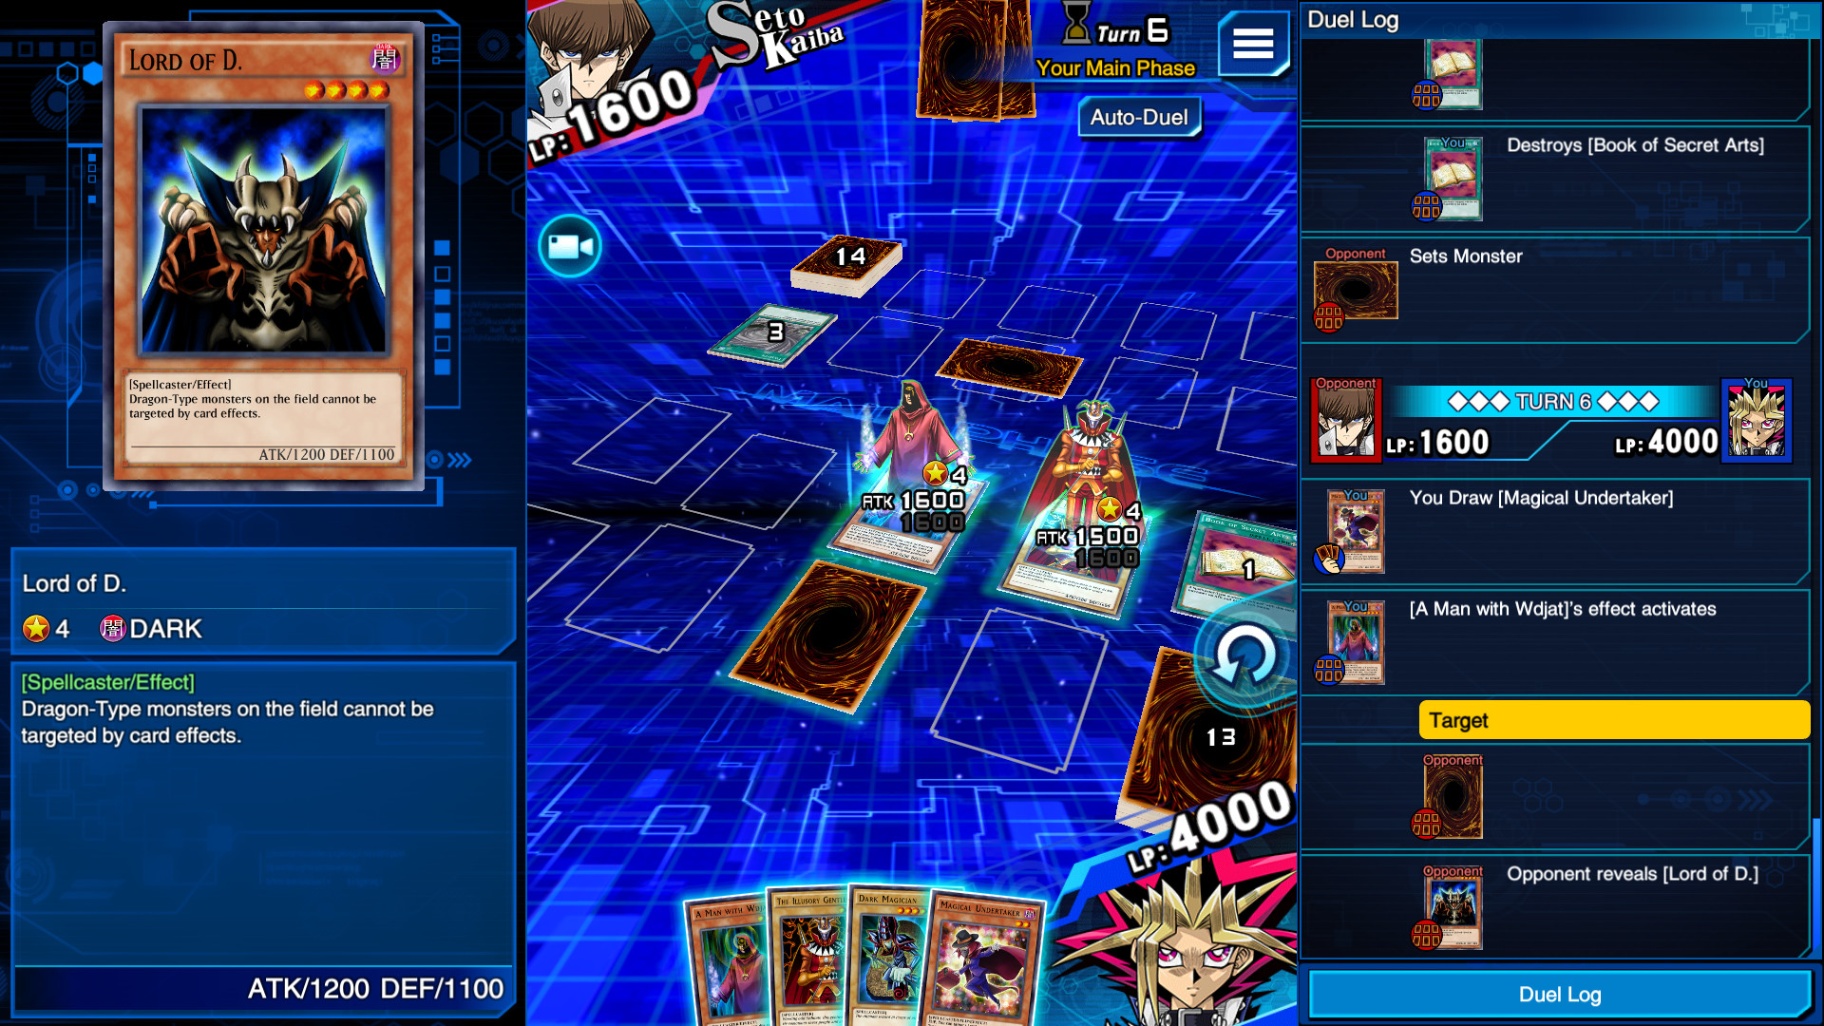 How to Get Gems on Yu-Gi-Oh! Duel Links